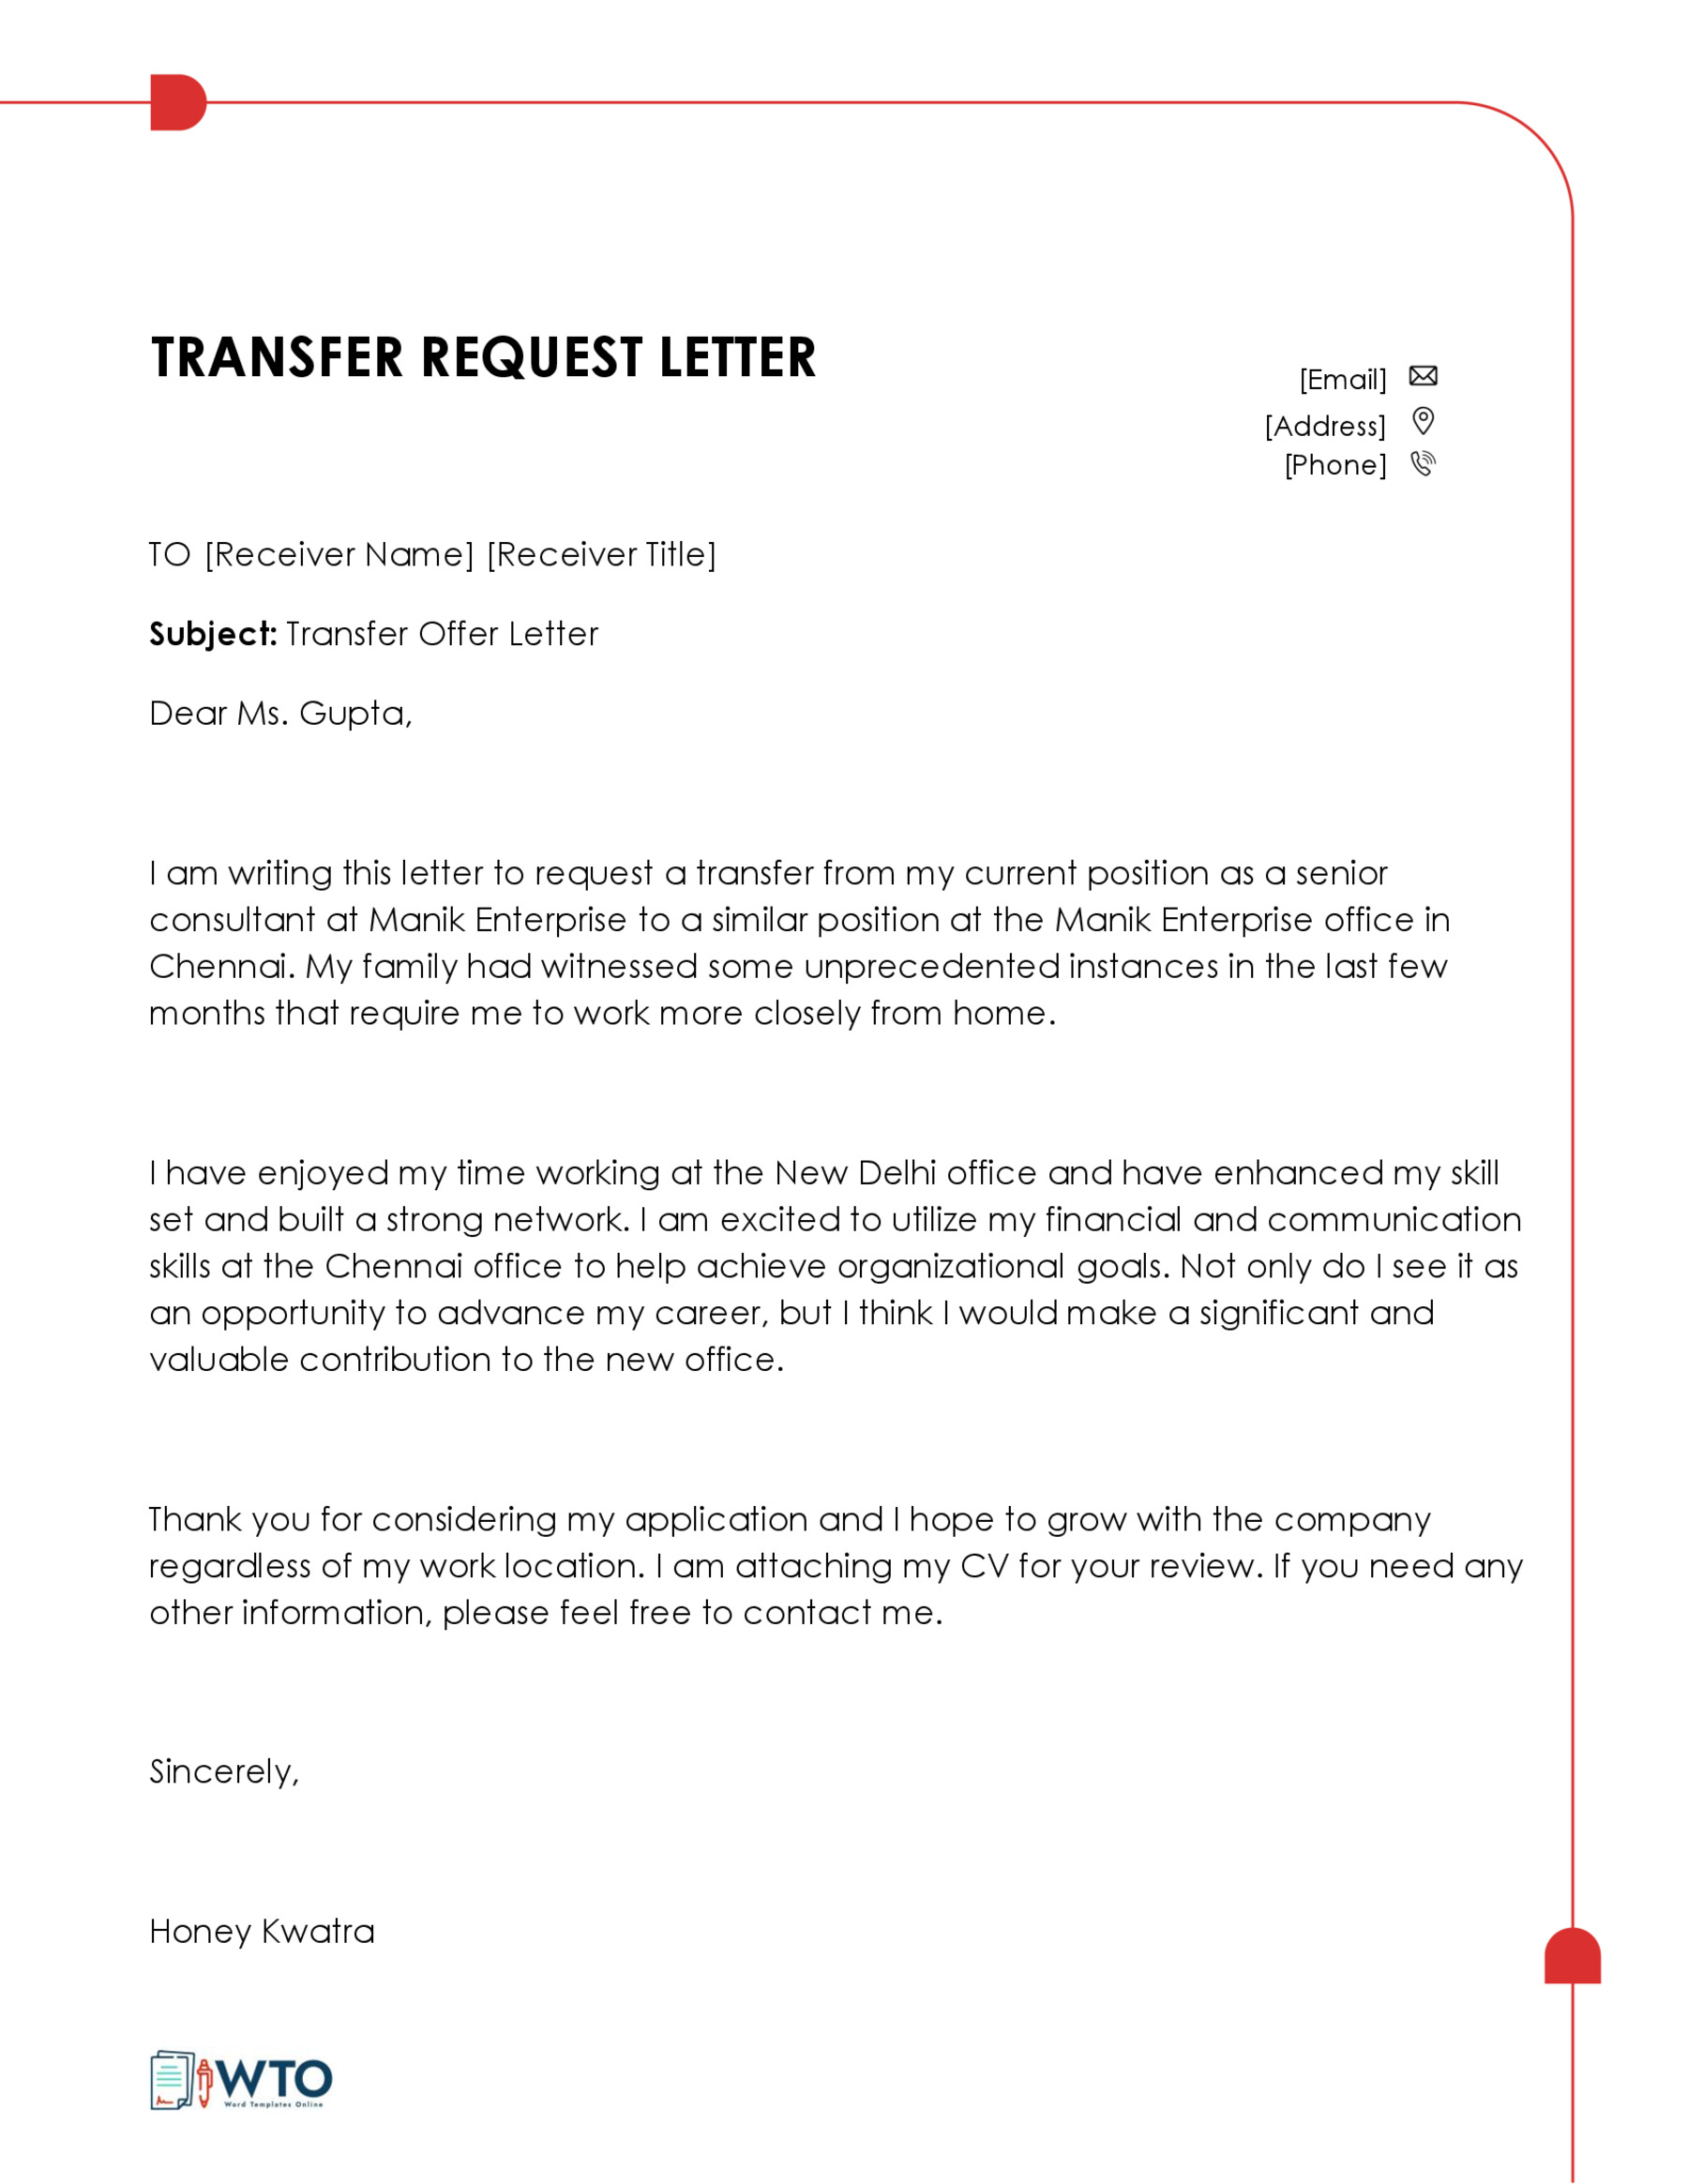 Free Editable Transfer Request Letter Sample 14 in Word Format